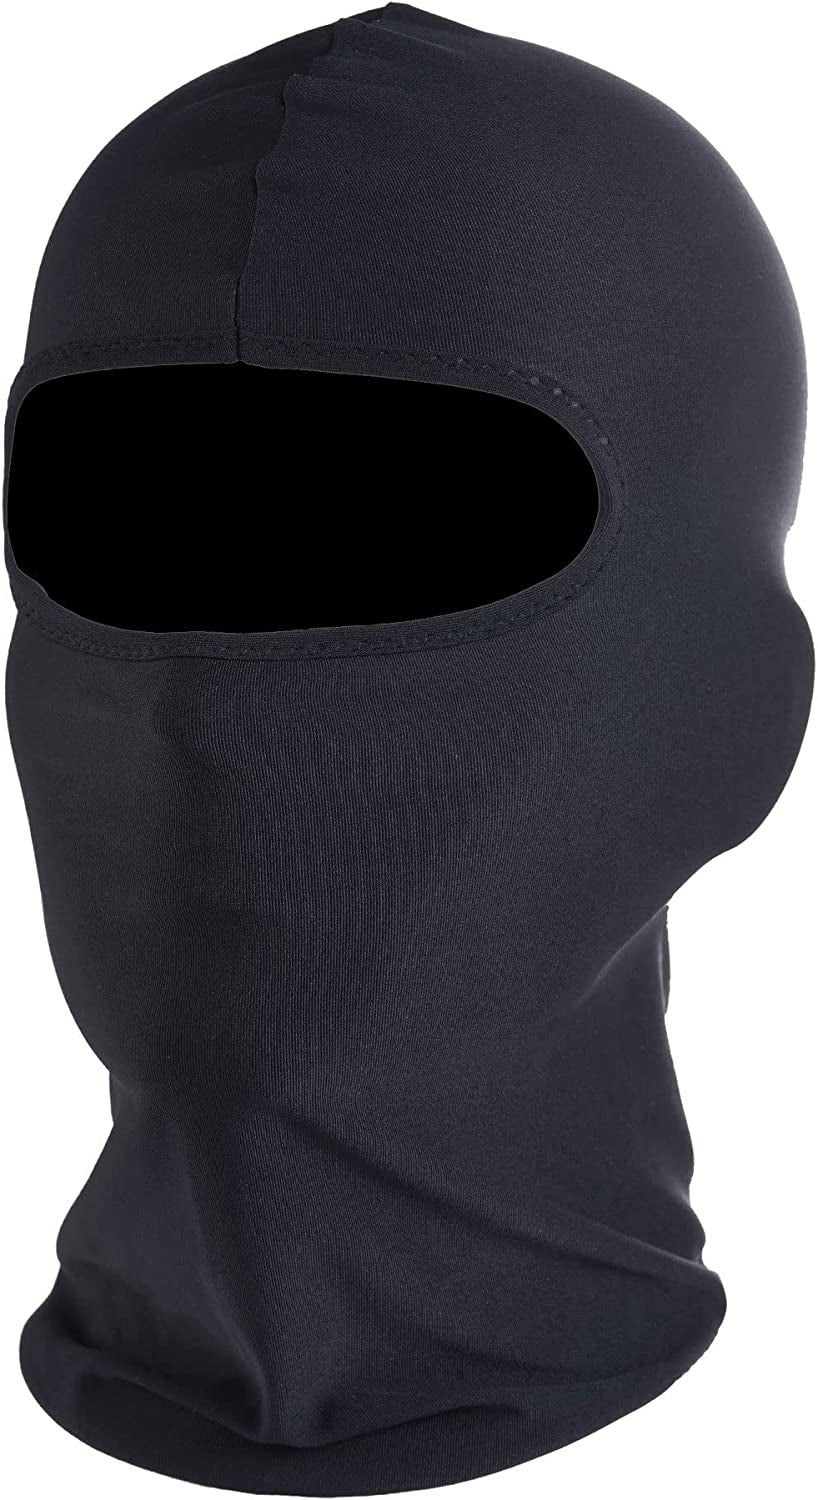 Full Face Cover Face Mask Adjustable Windproof UV Protection Hood 